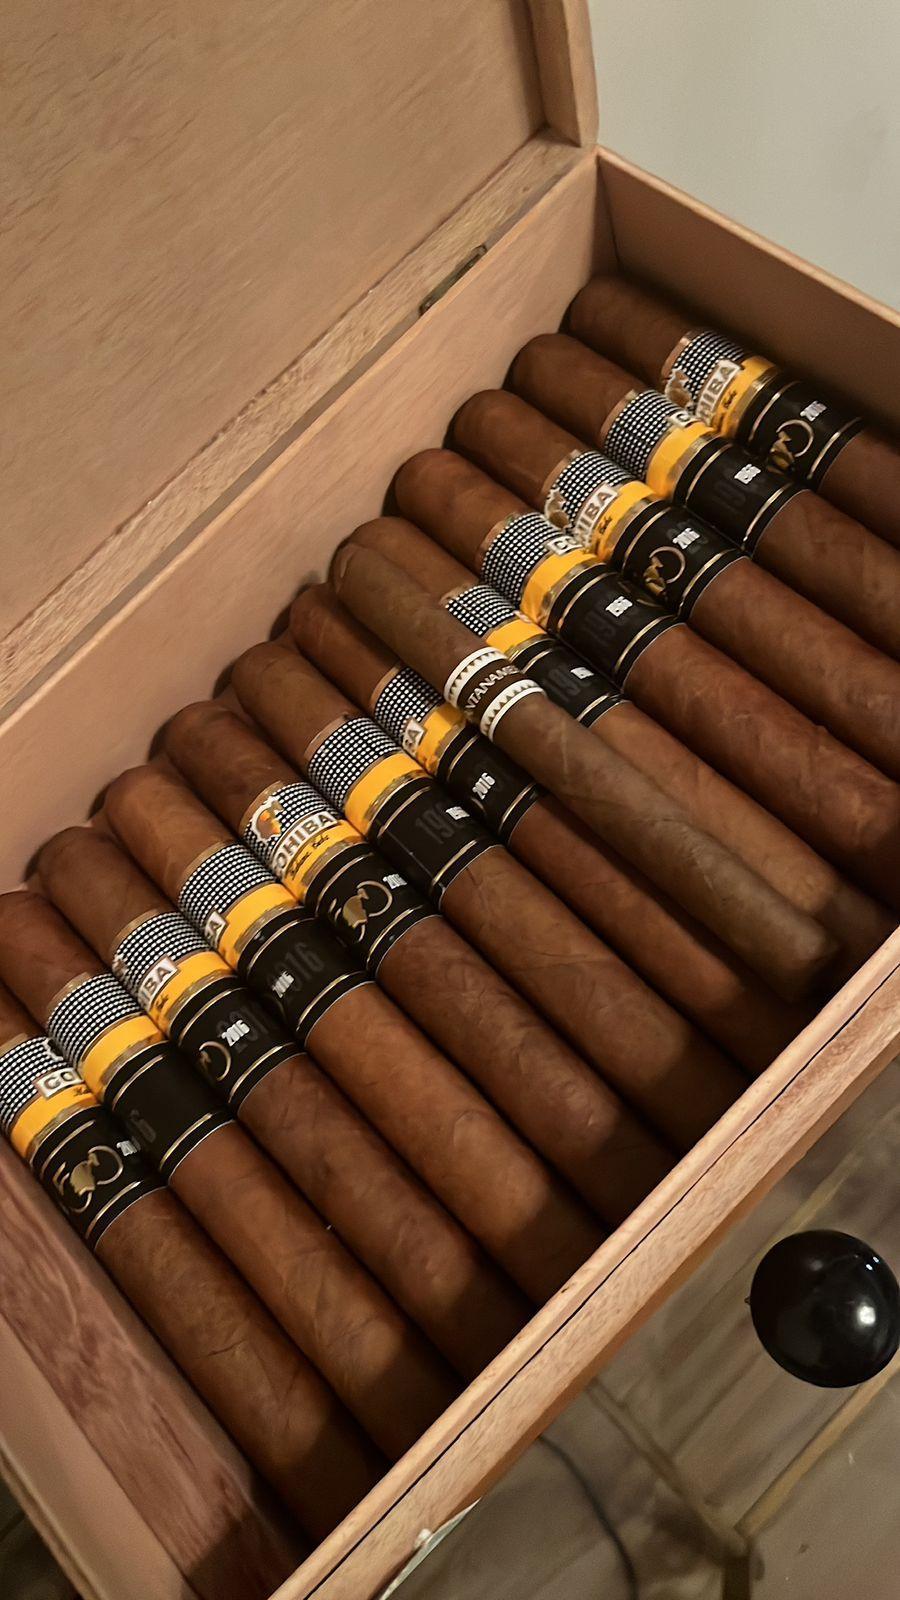 Weekend Comp: Let's play a game of Cuban Cigar Fake Snap